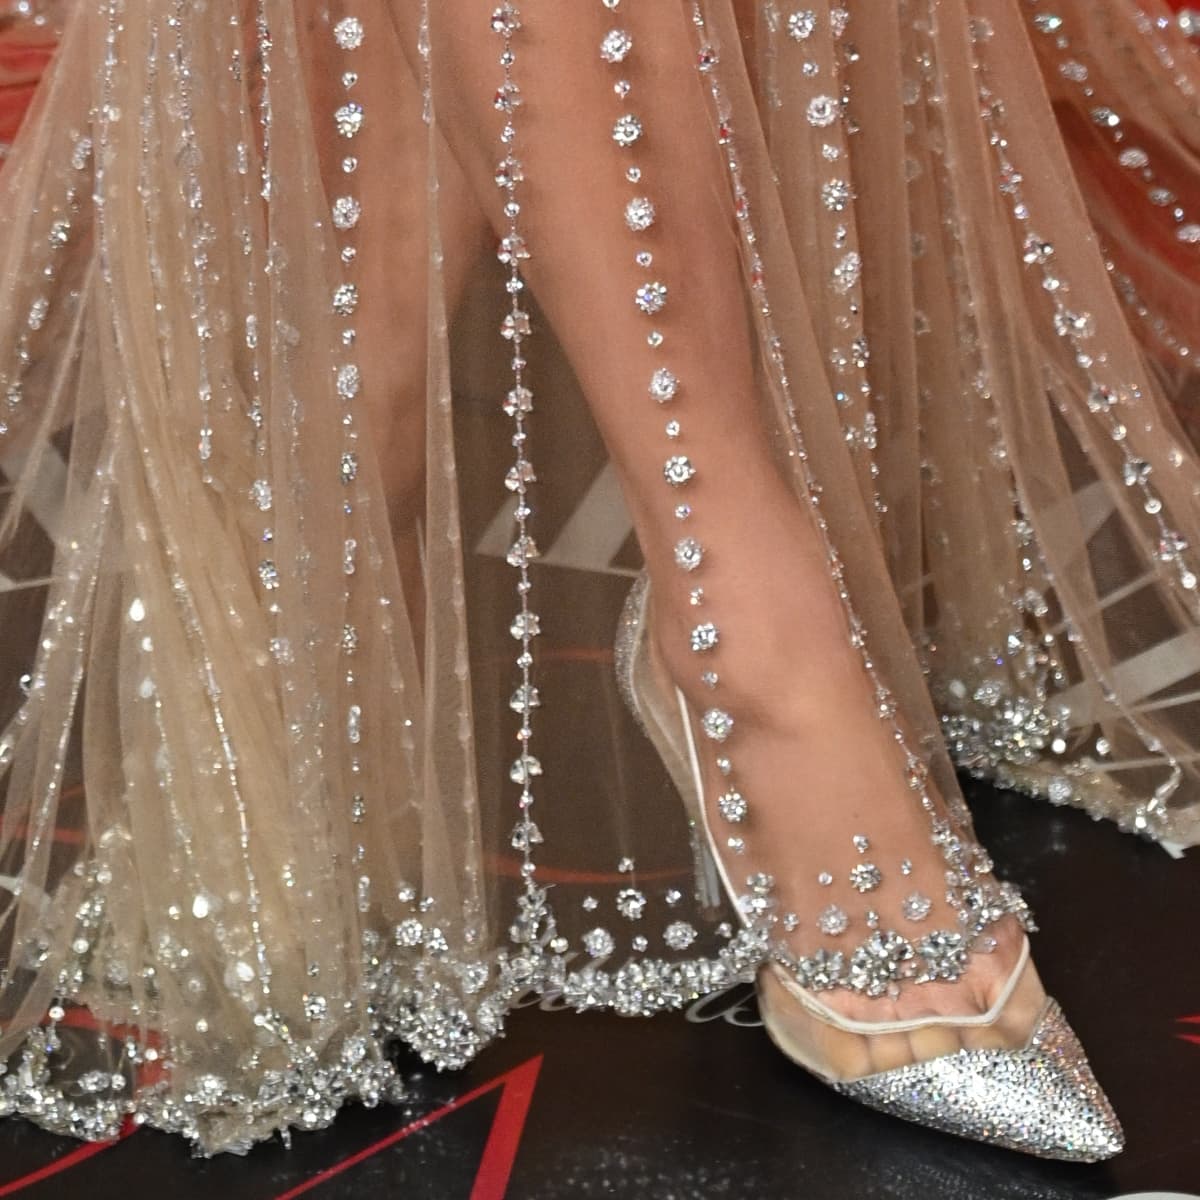 A close-up of Paris Hilton's feet adorned in sparkling Aquazzura Cara Mia pumps, the mirrored Swarovski crystals glistening, perfectly matching her glamorous attire